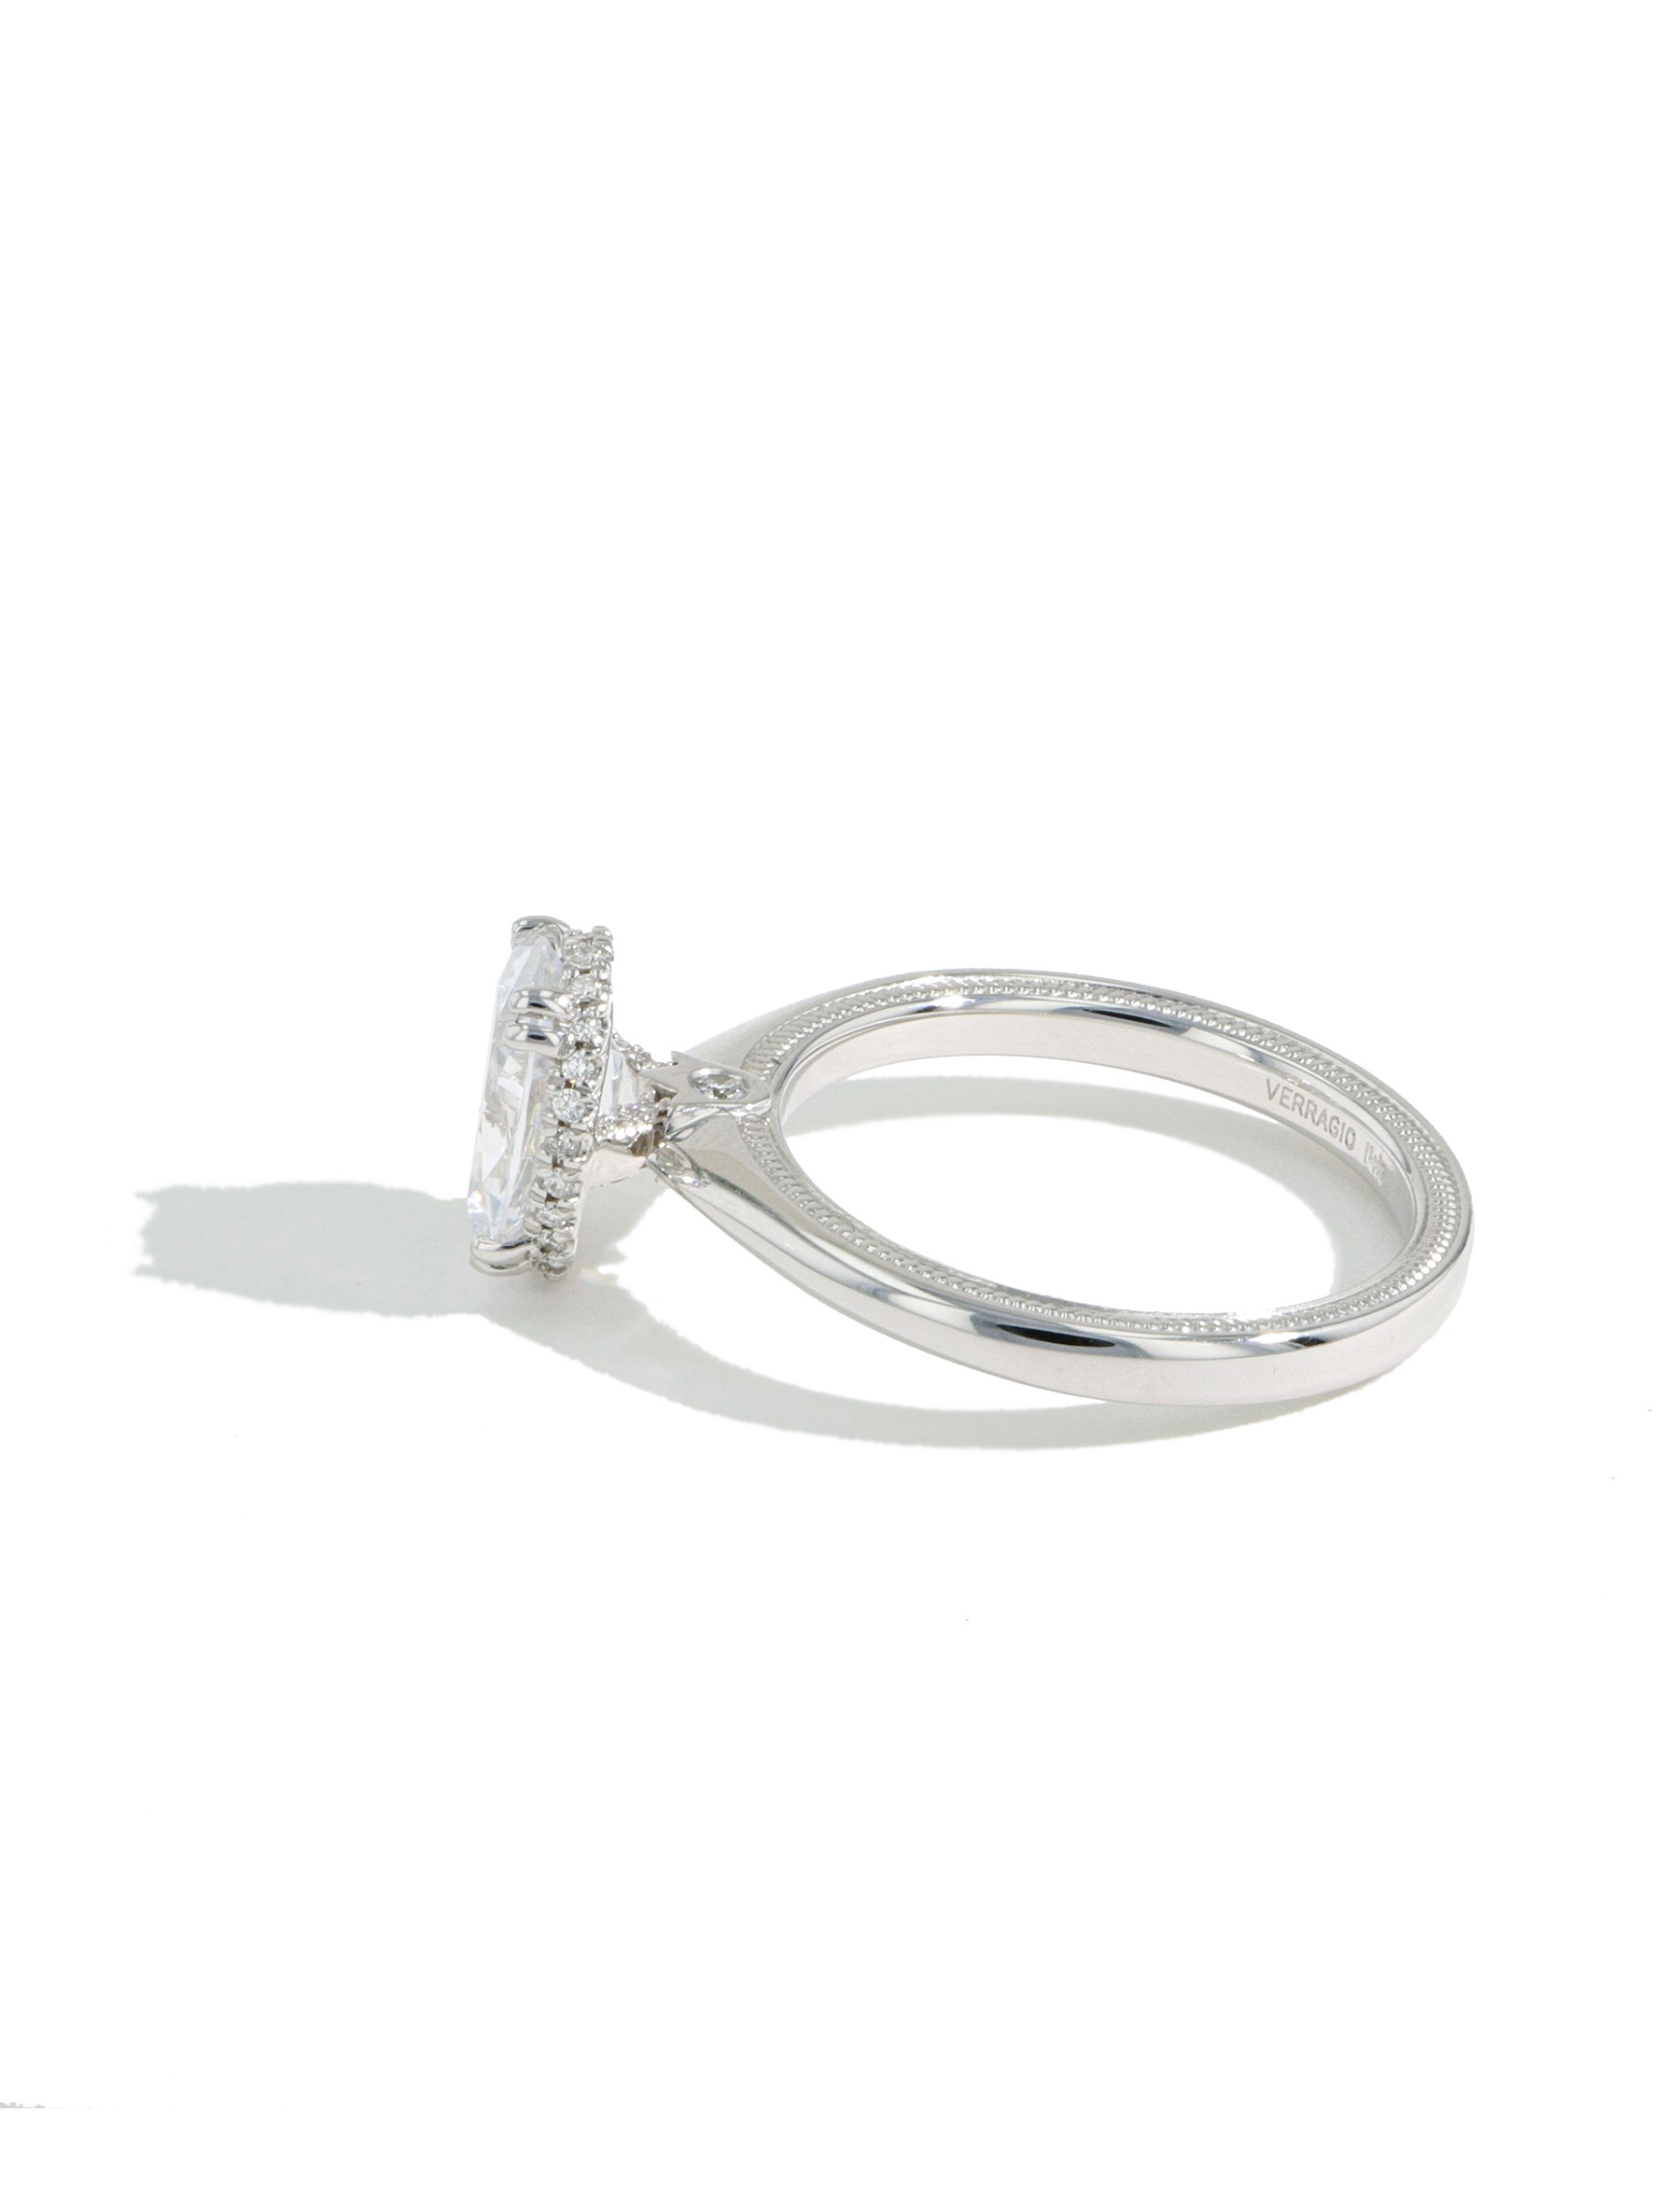 Verragio Tradition Oval Hidden Halo Engagement Ring Setting in White Gold side view 